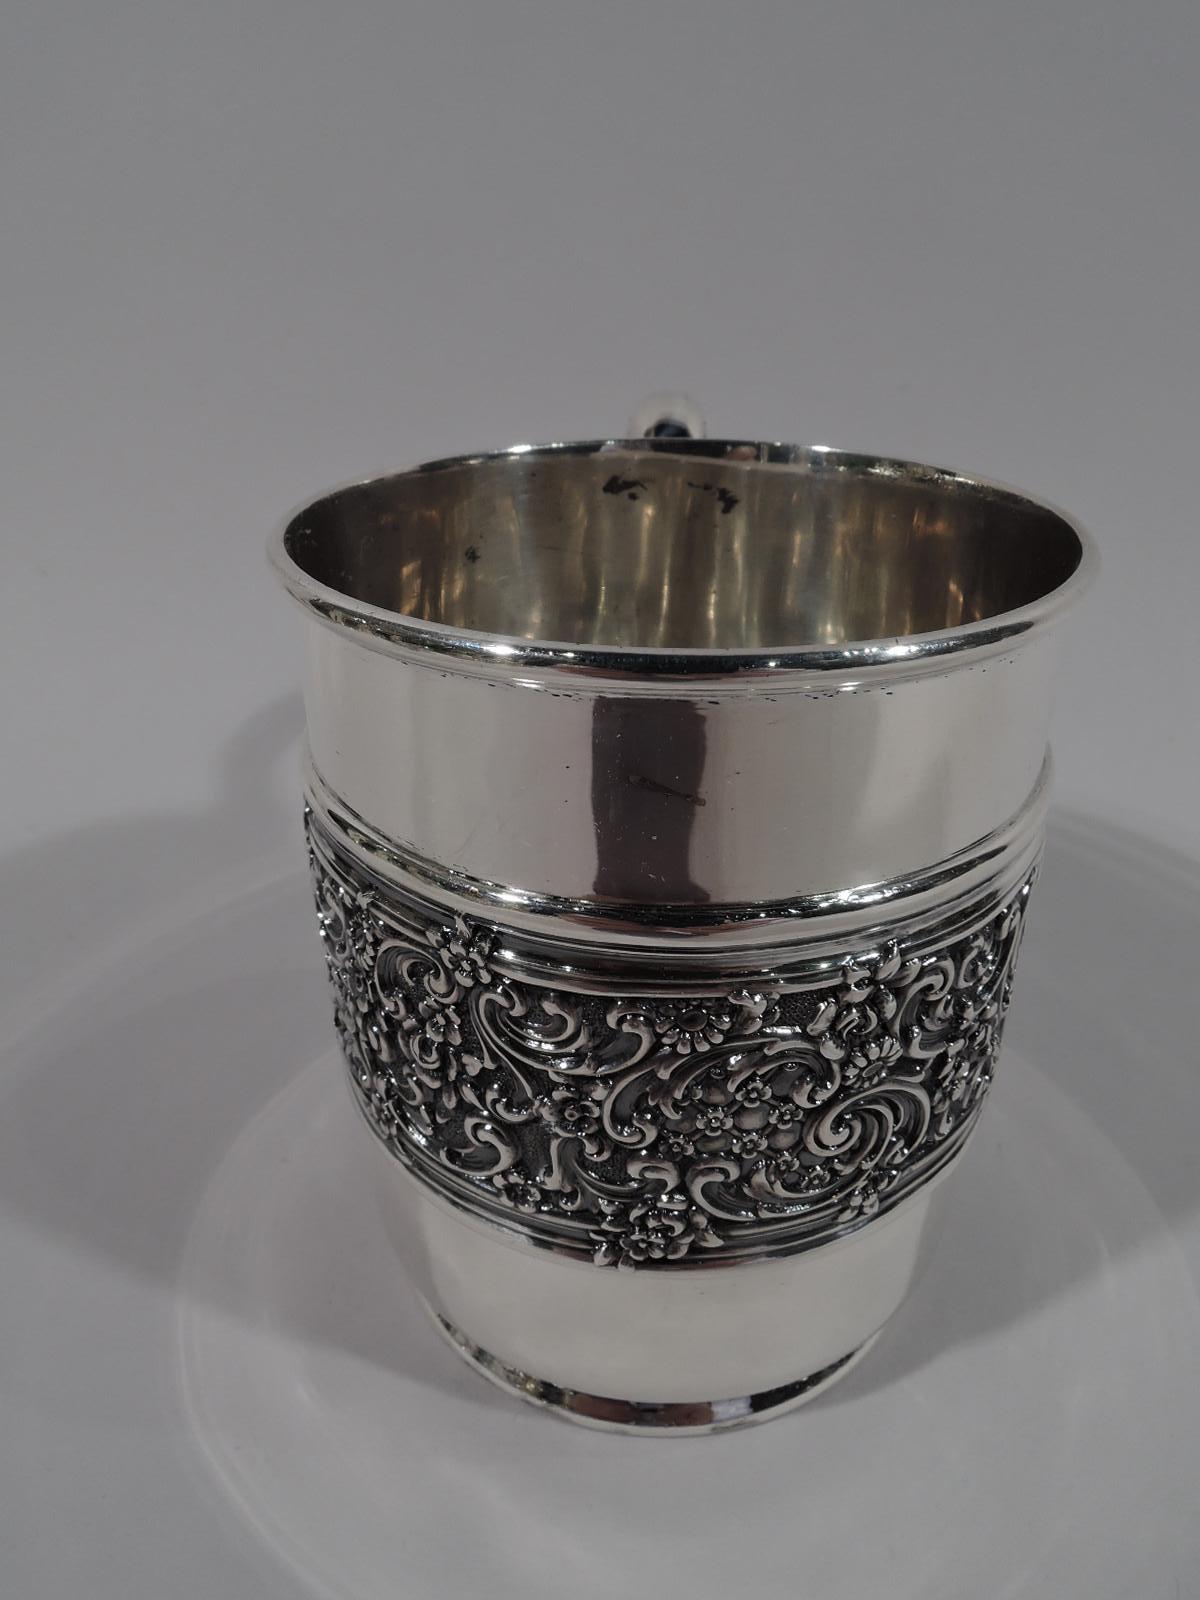 Edwardian sterling silver baby cup. Made by Tiffany & Co. in New York. Straight sides with wide ornamental band of scrolls, diaper, and flowers overlapping molded borders. High looping tapering handle with serrated leaf cap and short foot. Top and